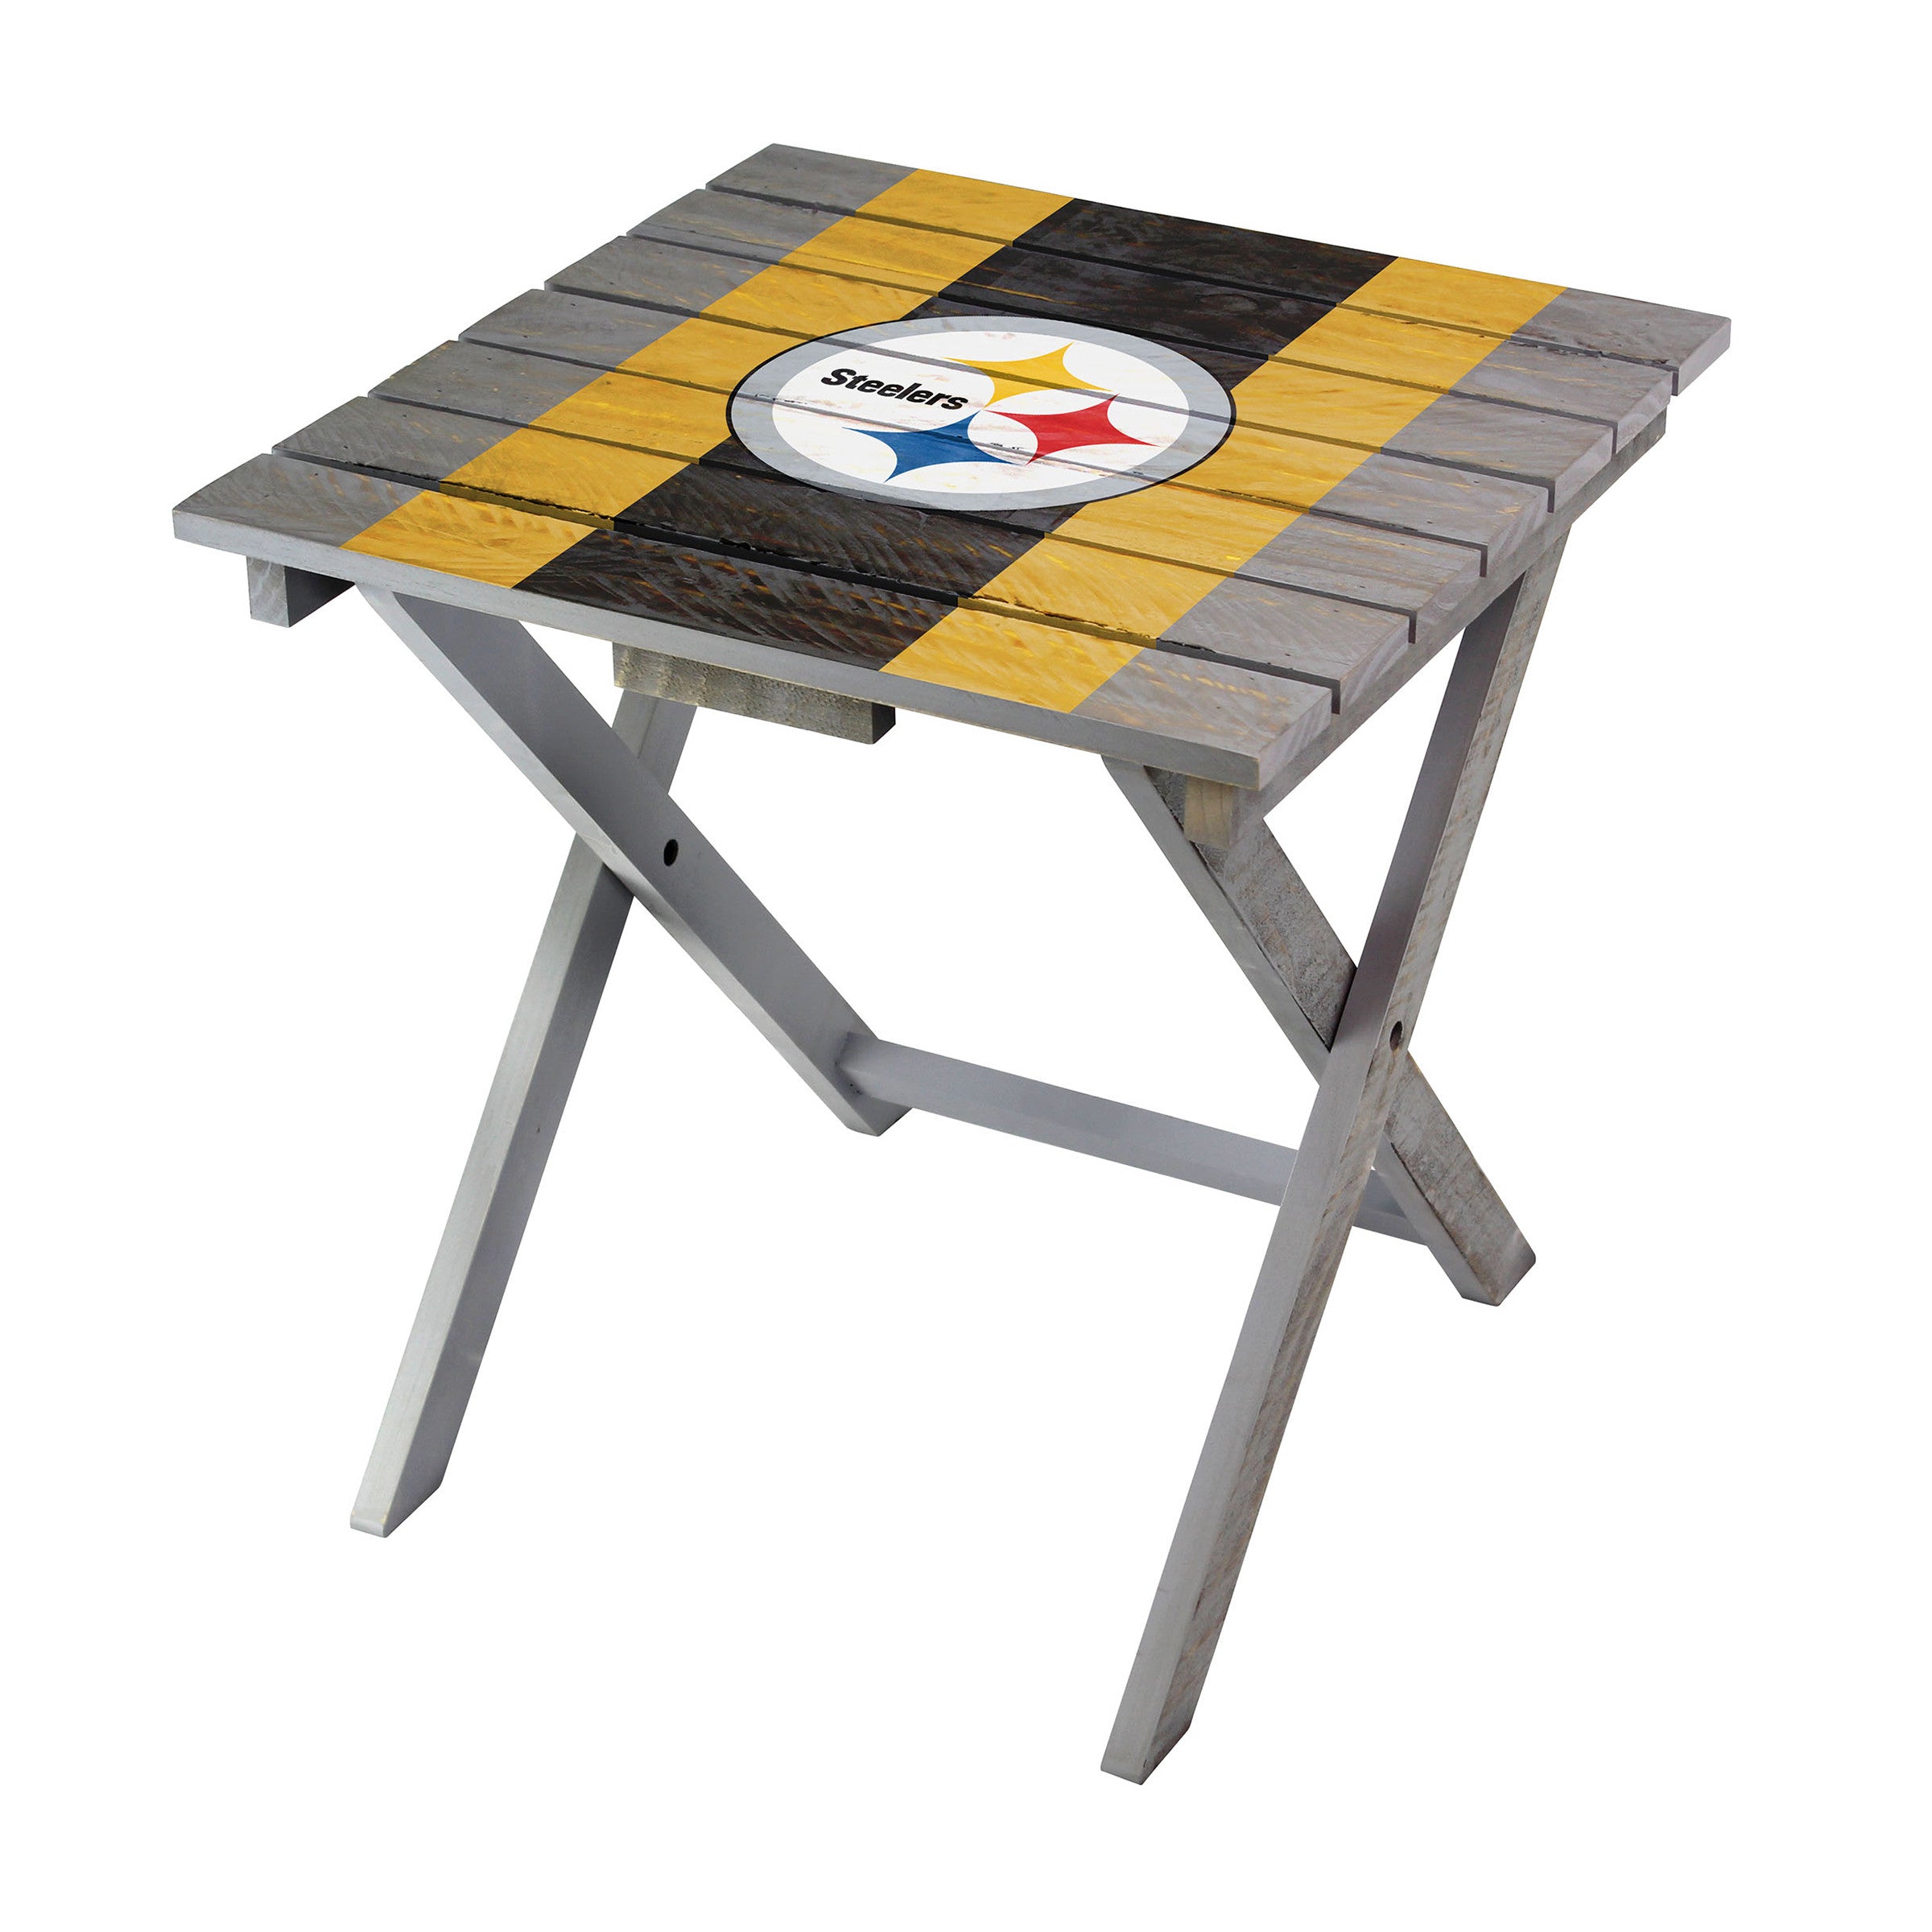 Imperial Pittsburgh Steelers Folding Adirondack Table